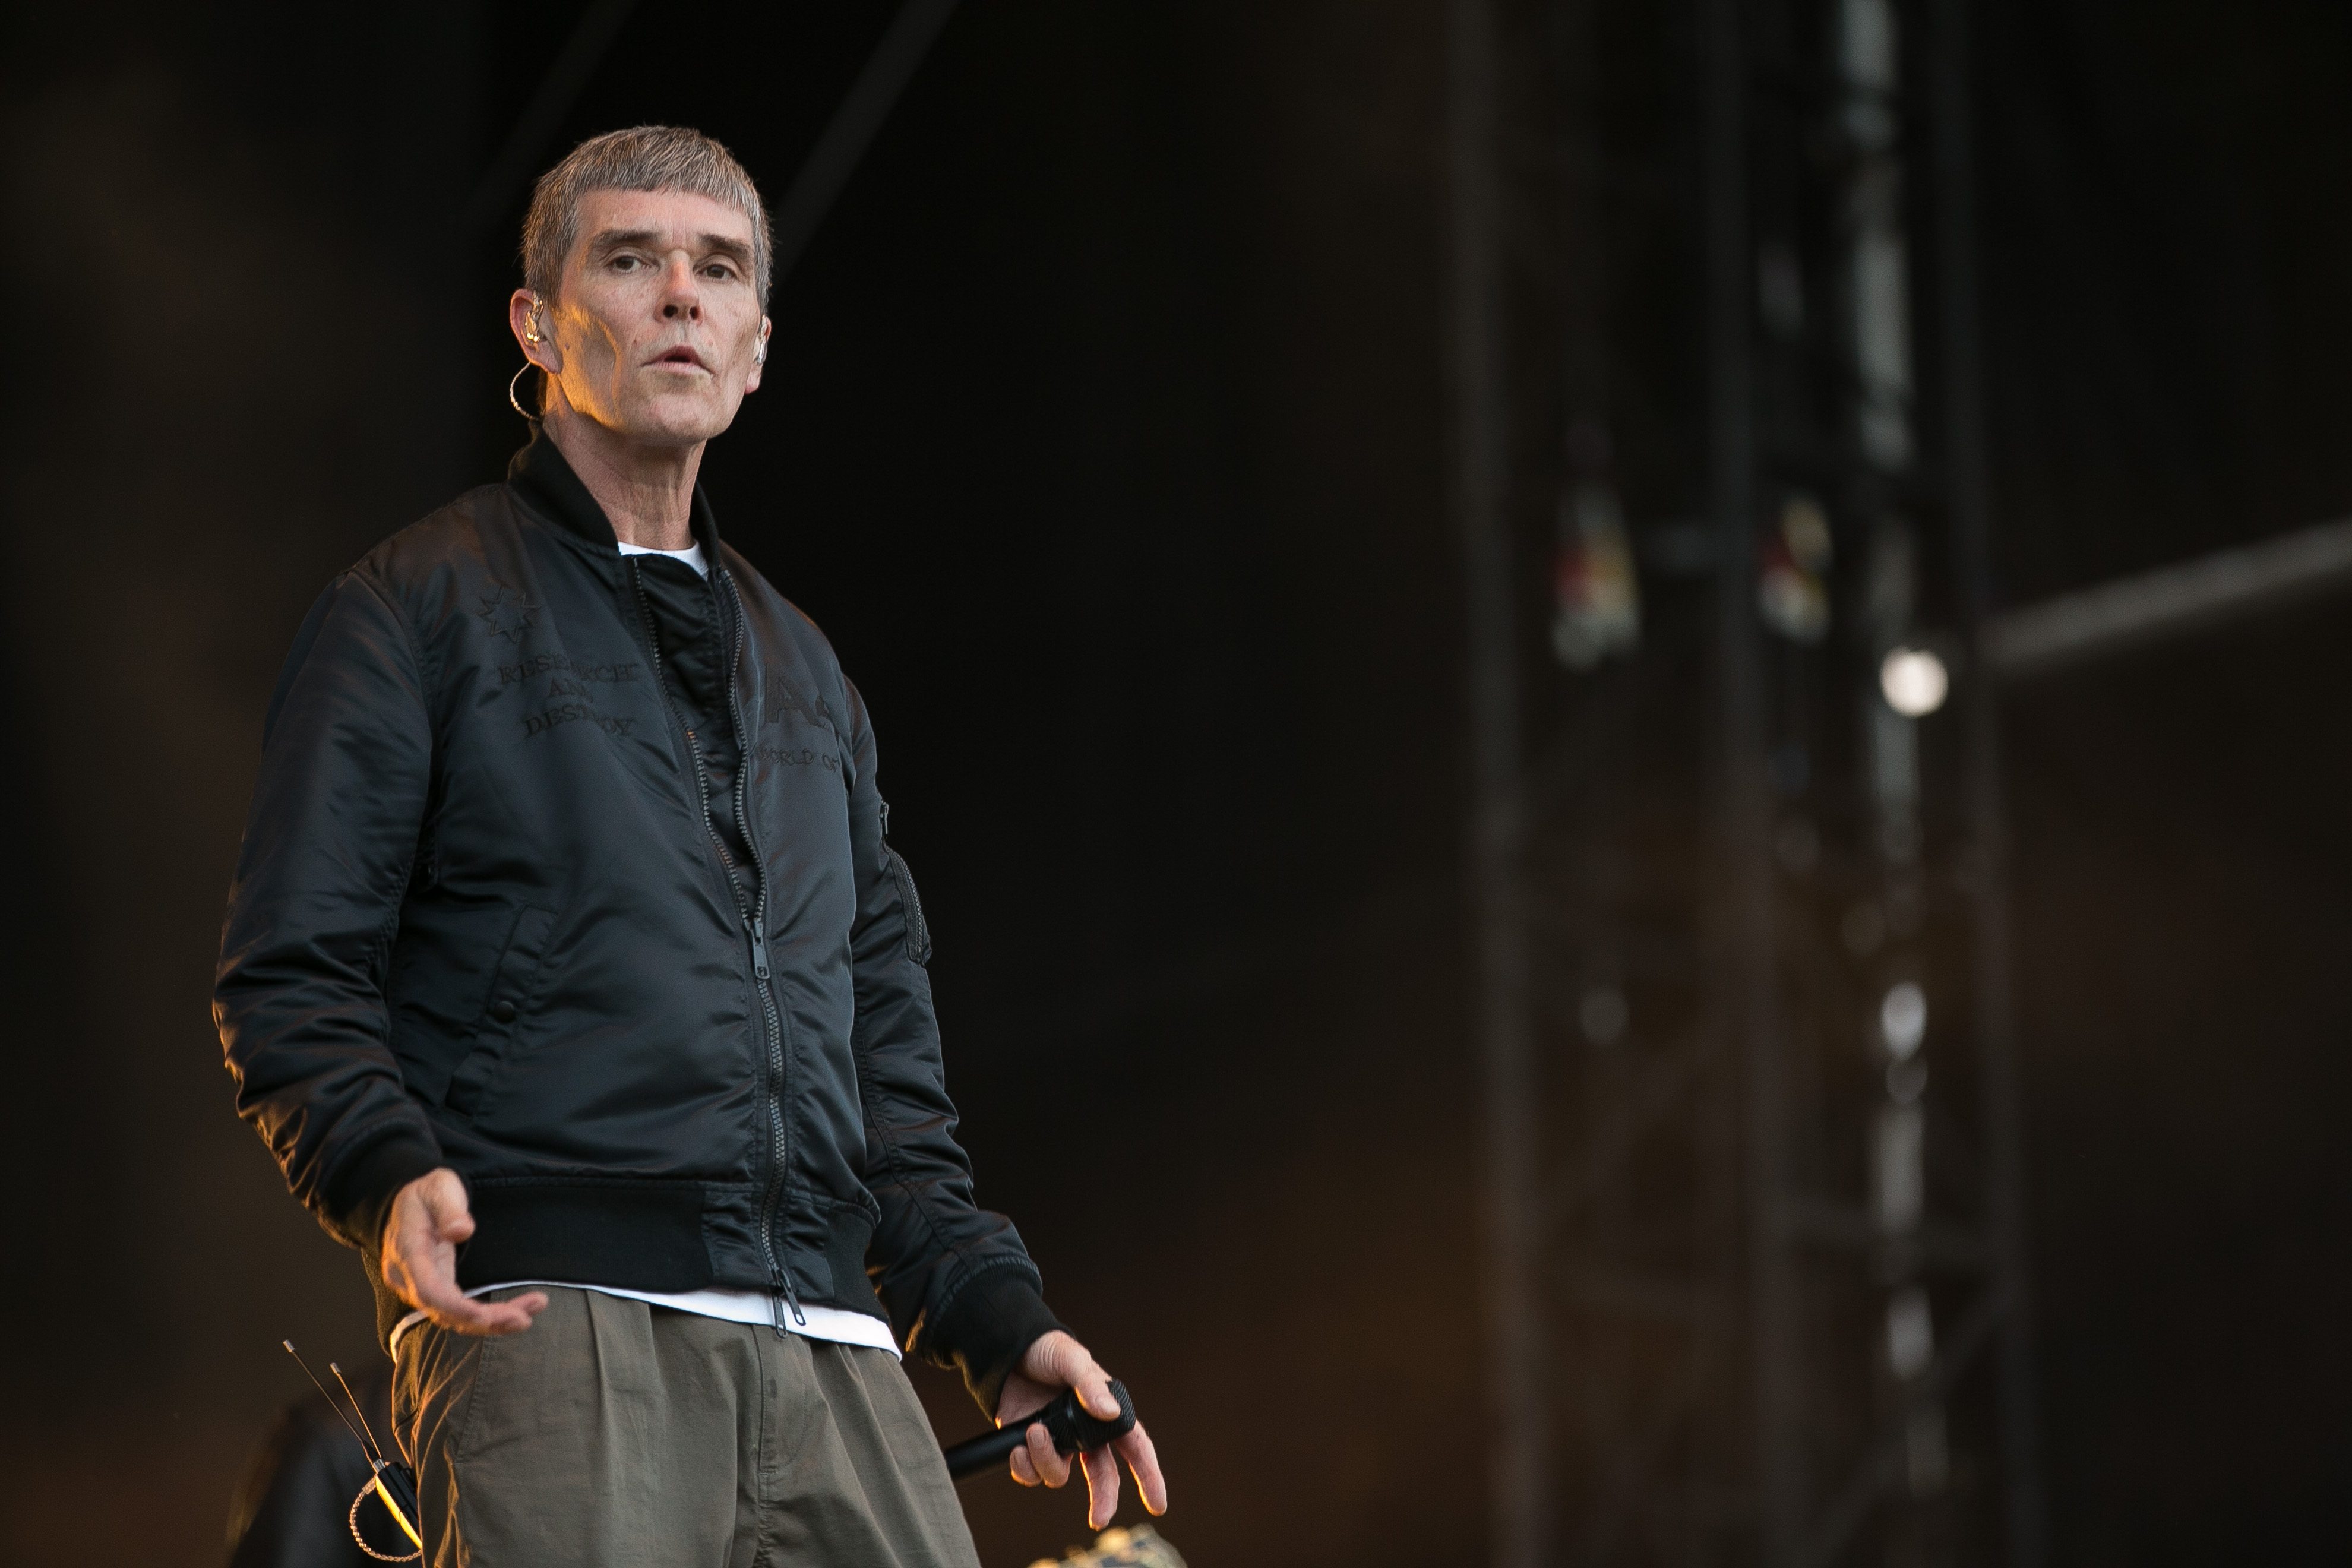 Stone Roses Singer Ian Brown Cancels Festival Gig Due to Attendee Vaccination Requirement